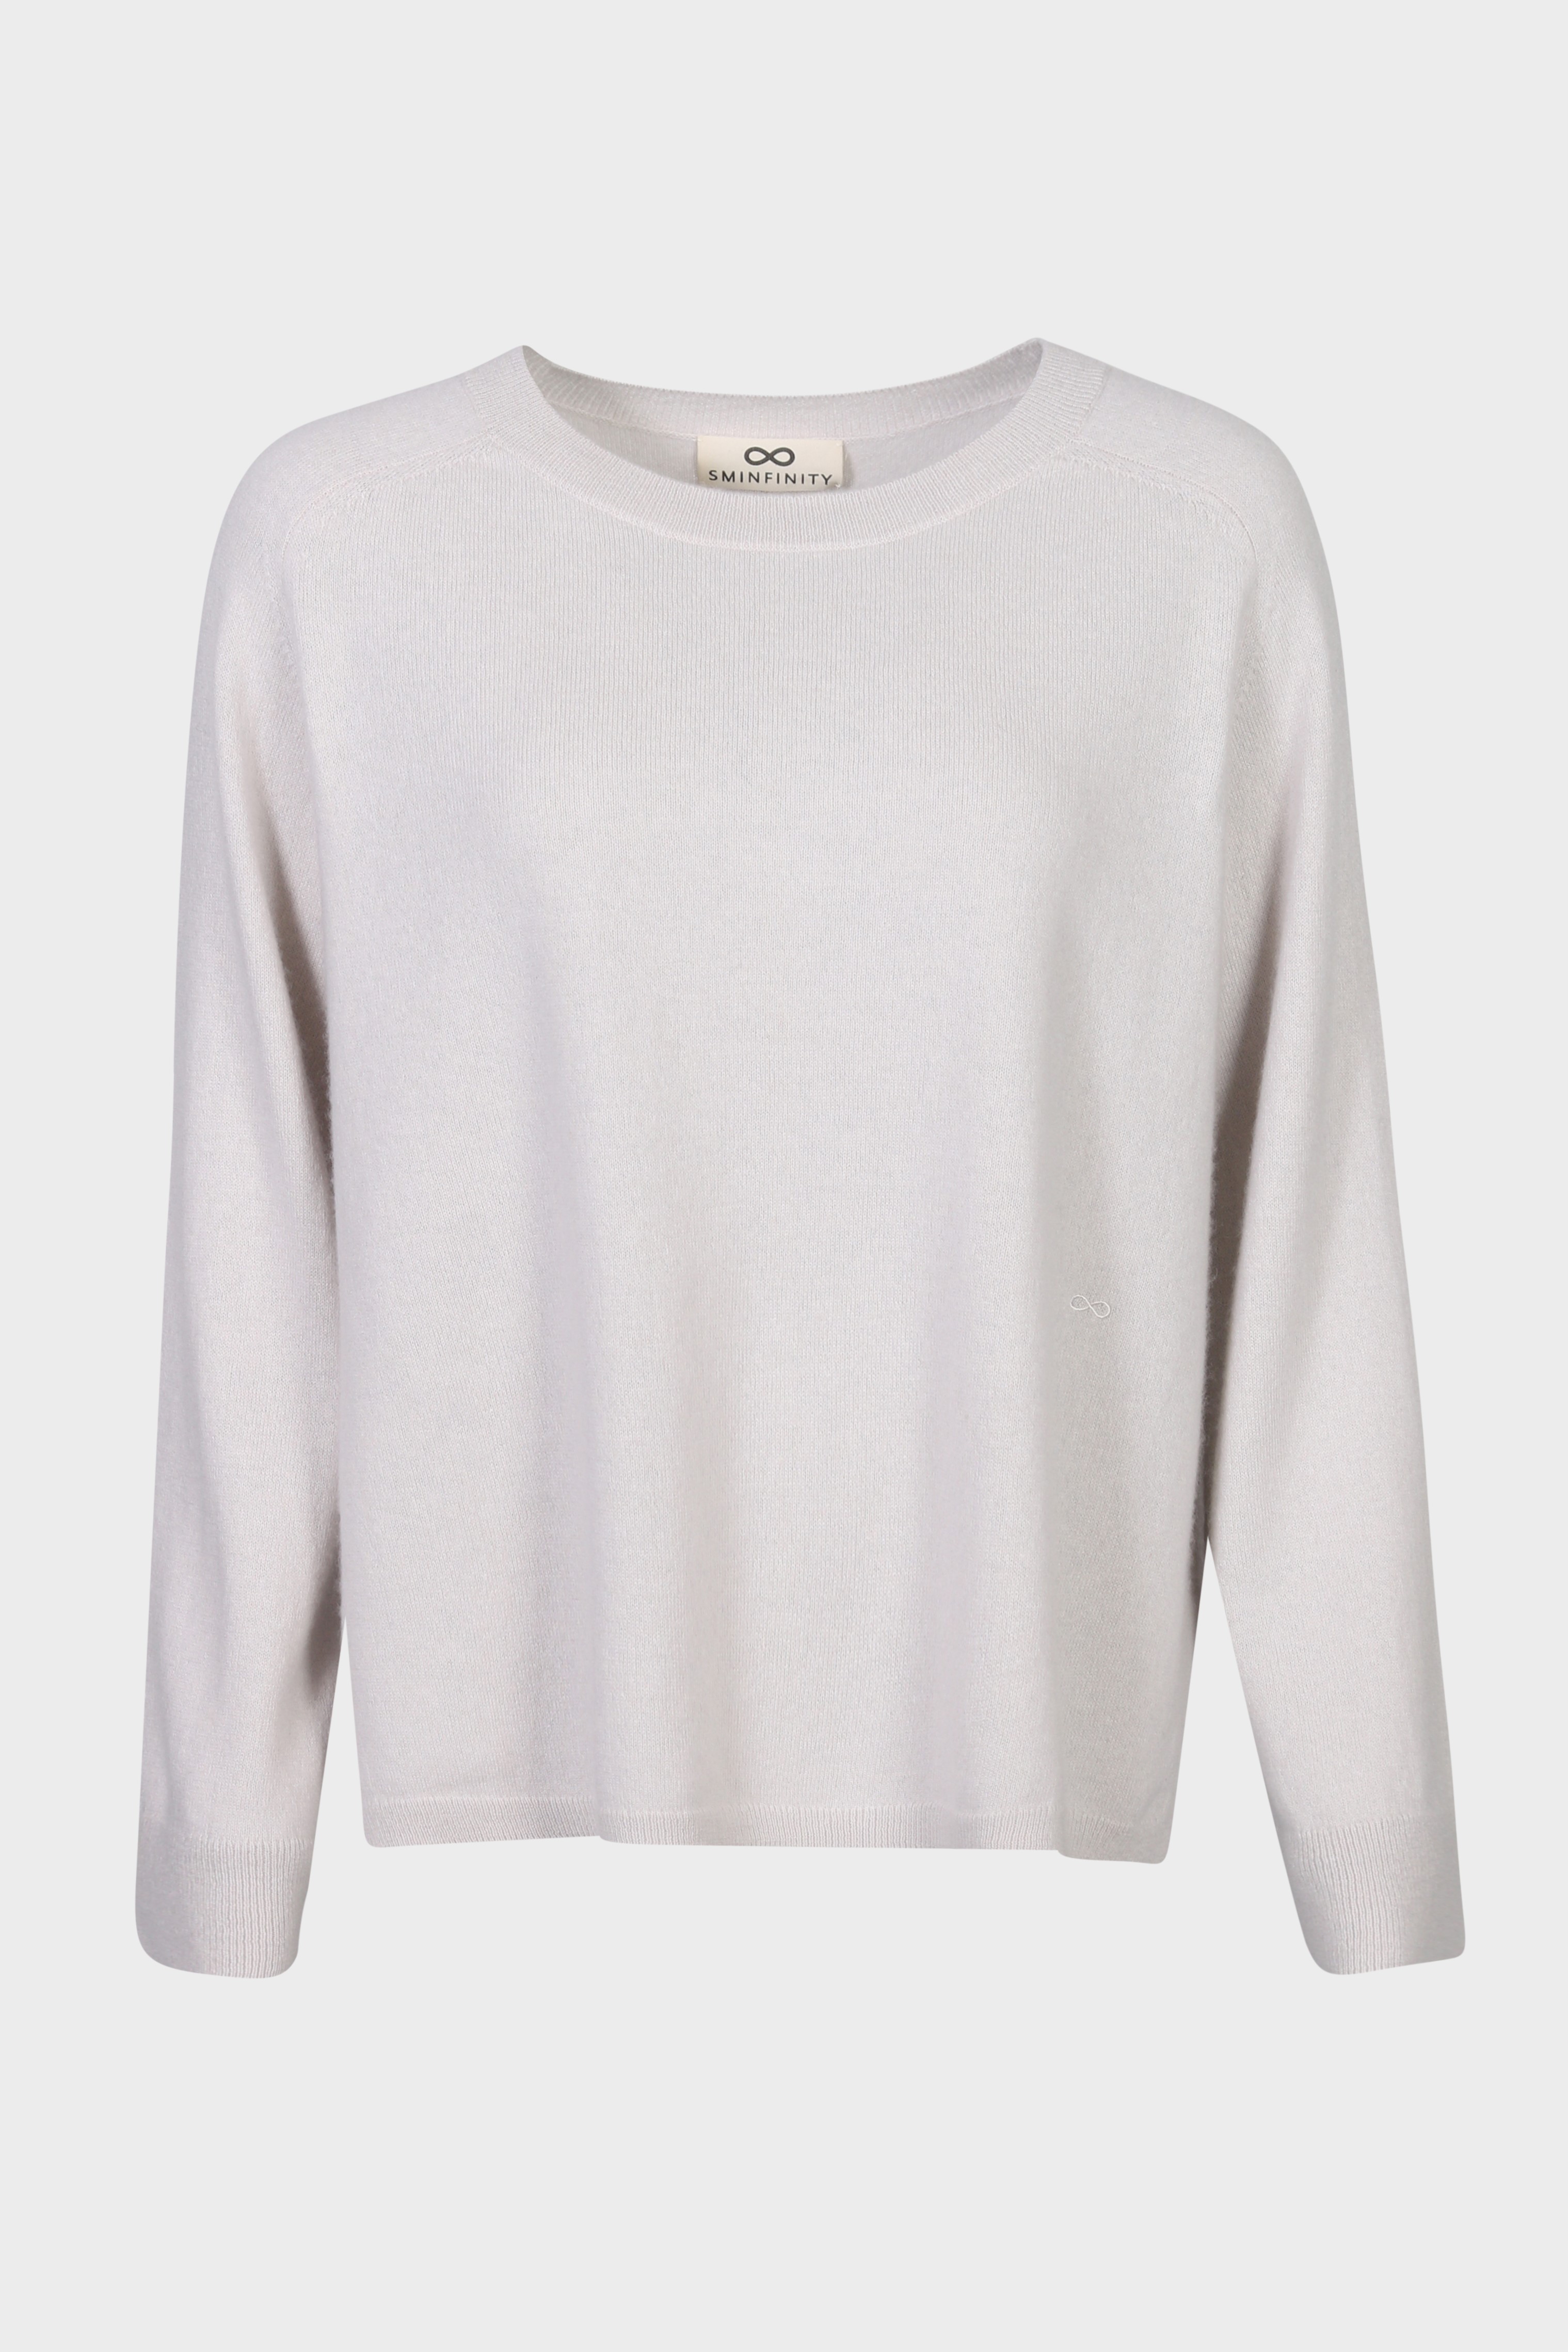 SMINFINITY Chilly Knit Pullover in Pebble M/L